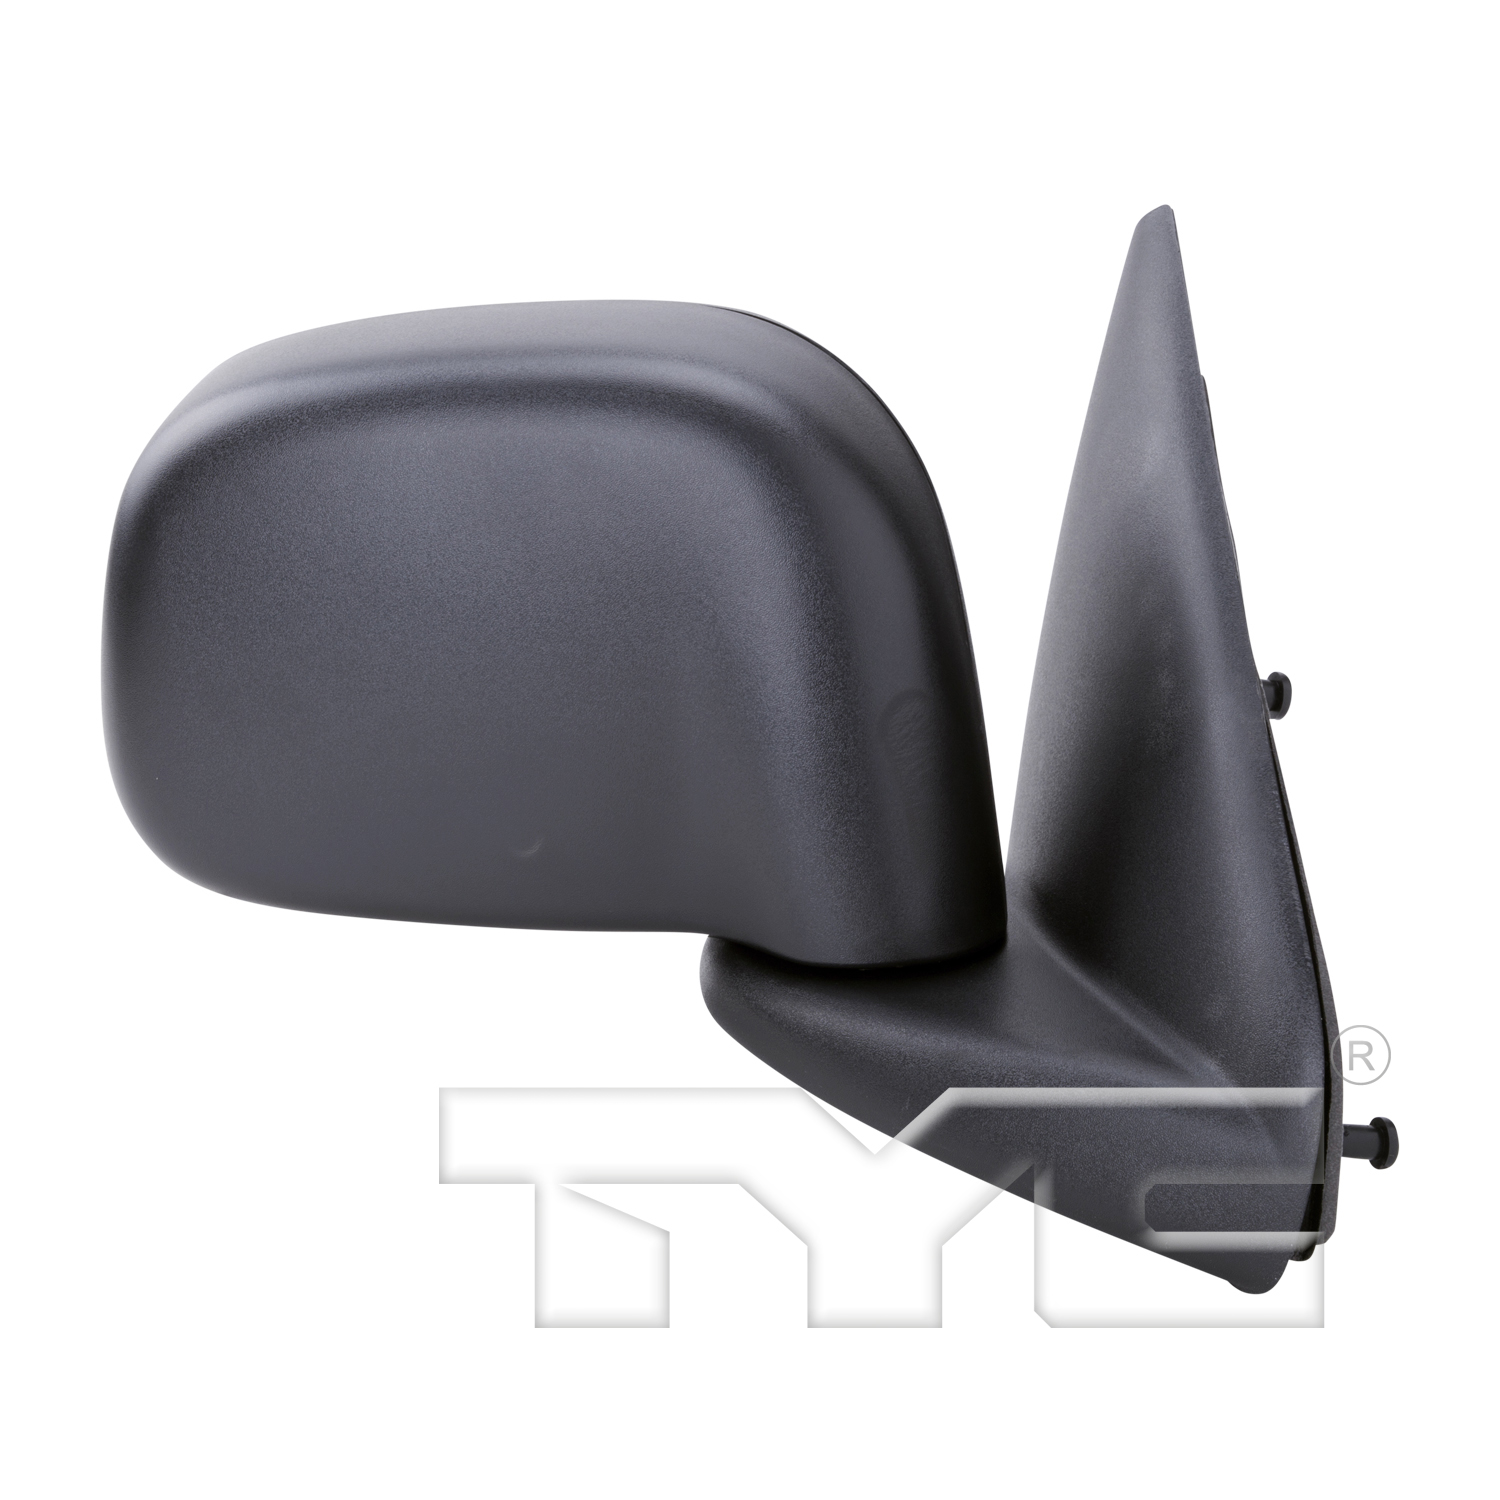 Aftermarket MIRRORS for DODGE - RAM 2500, RAM 2500,05-09,RT Mirror outside rear view